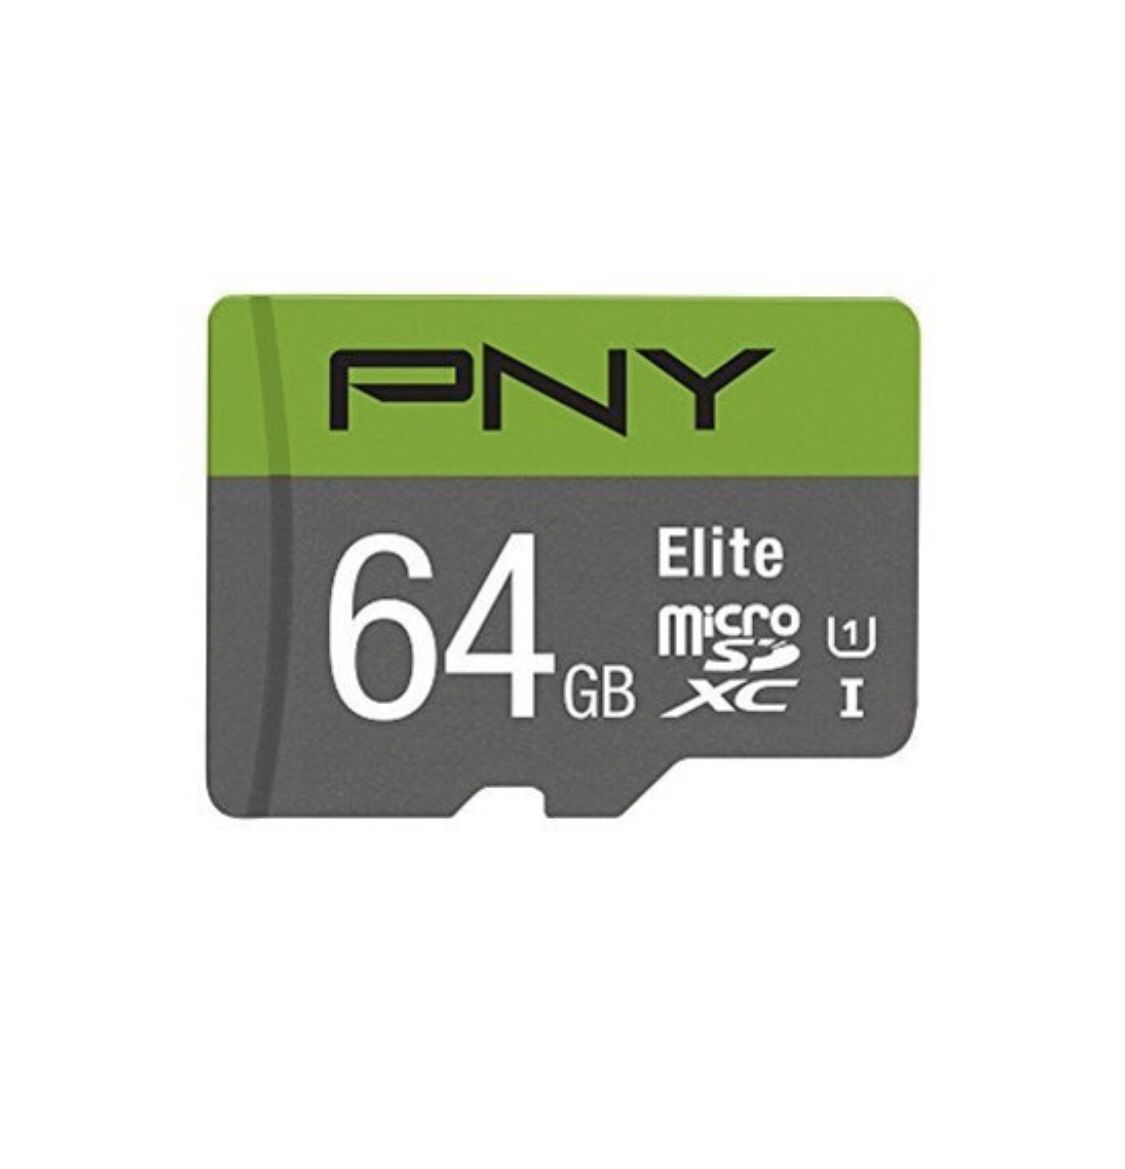 Pny 64GB Elite microSDXC Card CL 10 85MB/s with Adapter